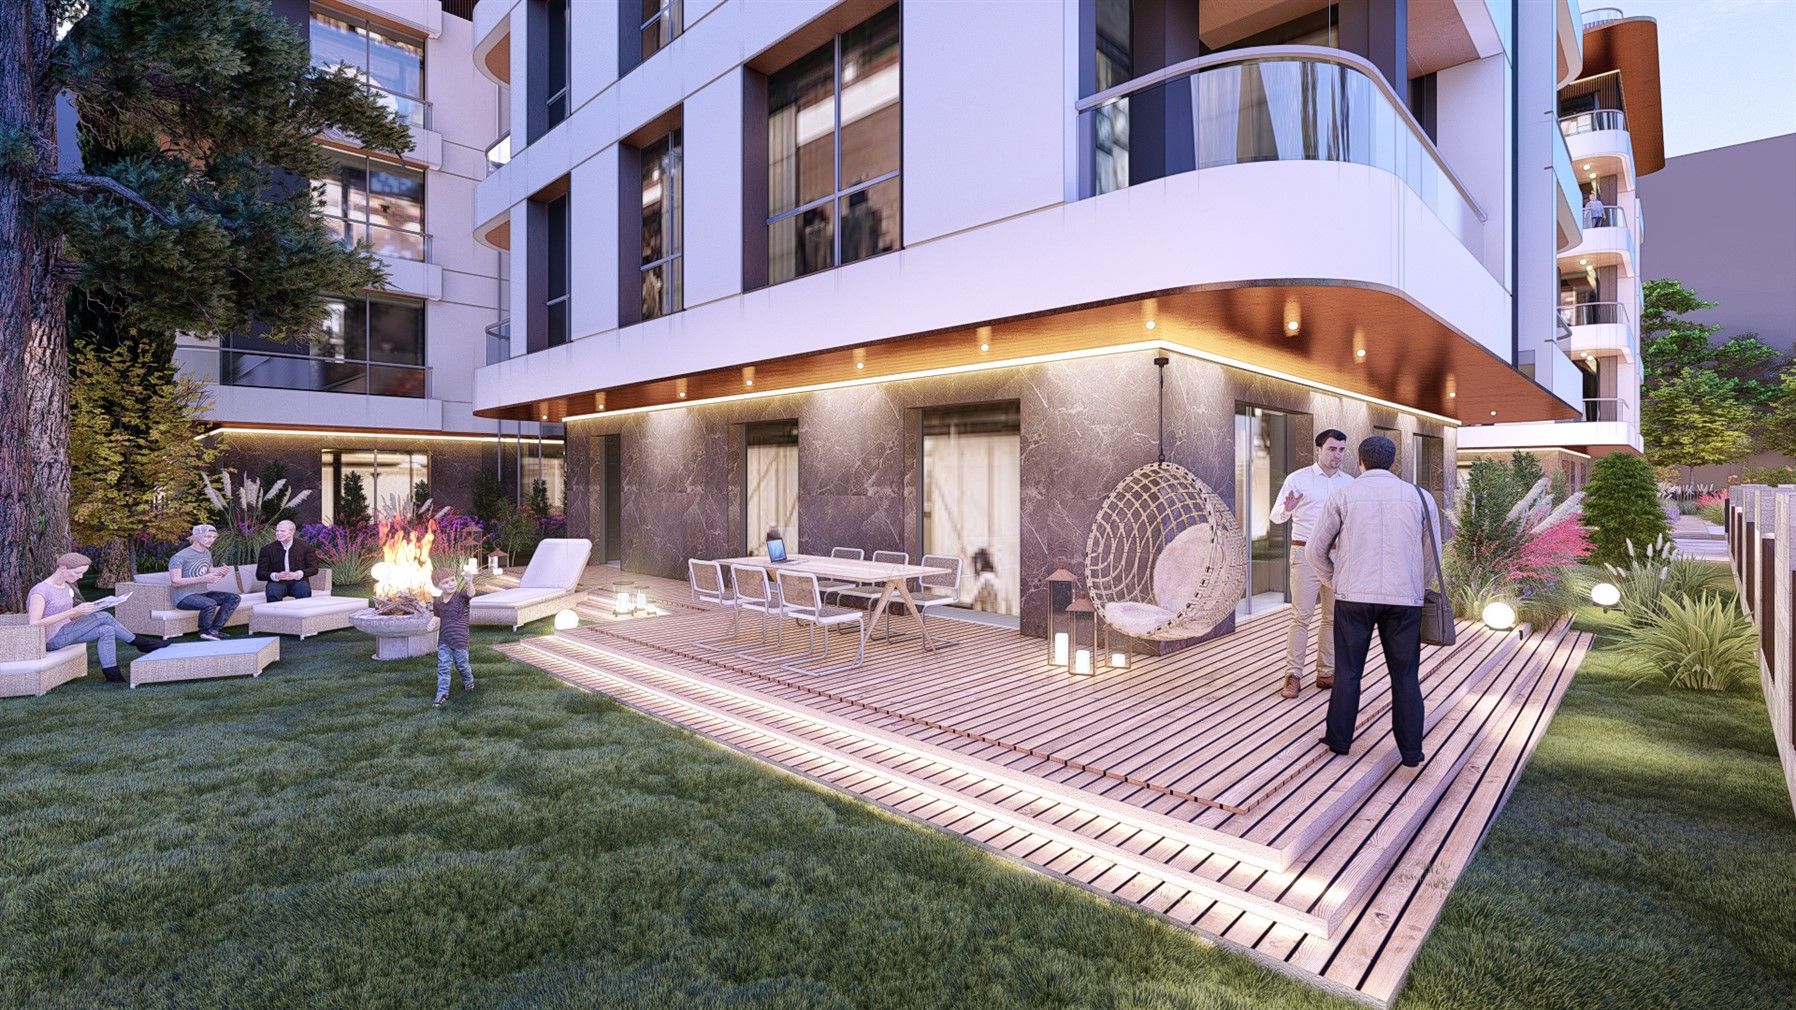 Modern project in one of the most prestigious district of the city